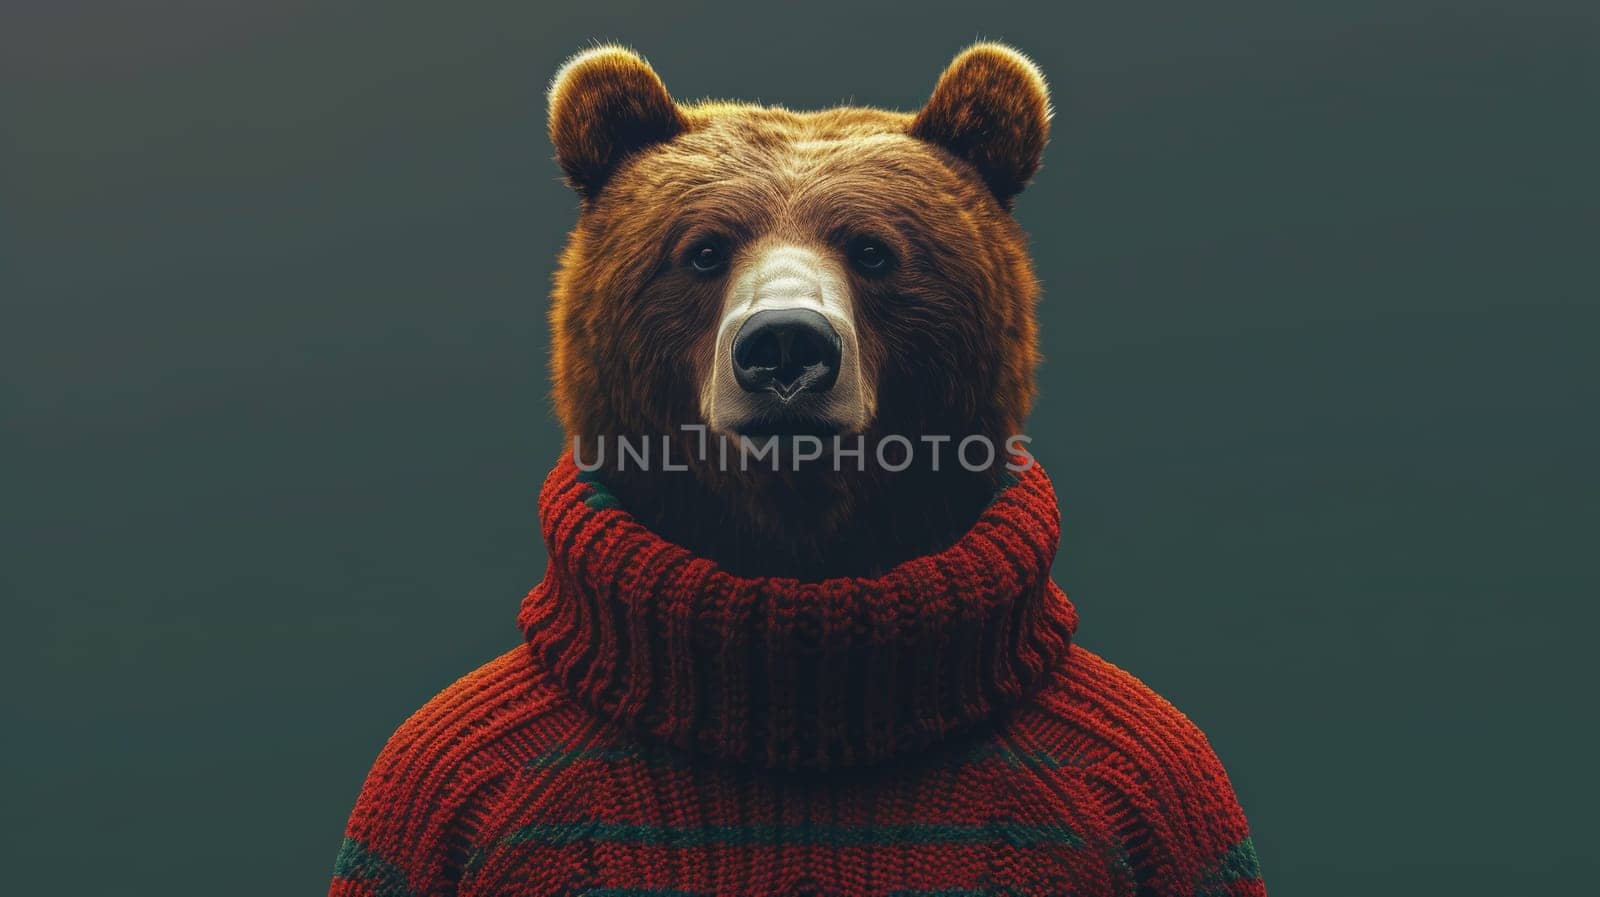 A bear wearing a sweater with the face of an animal, AI by starush